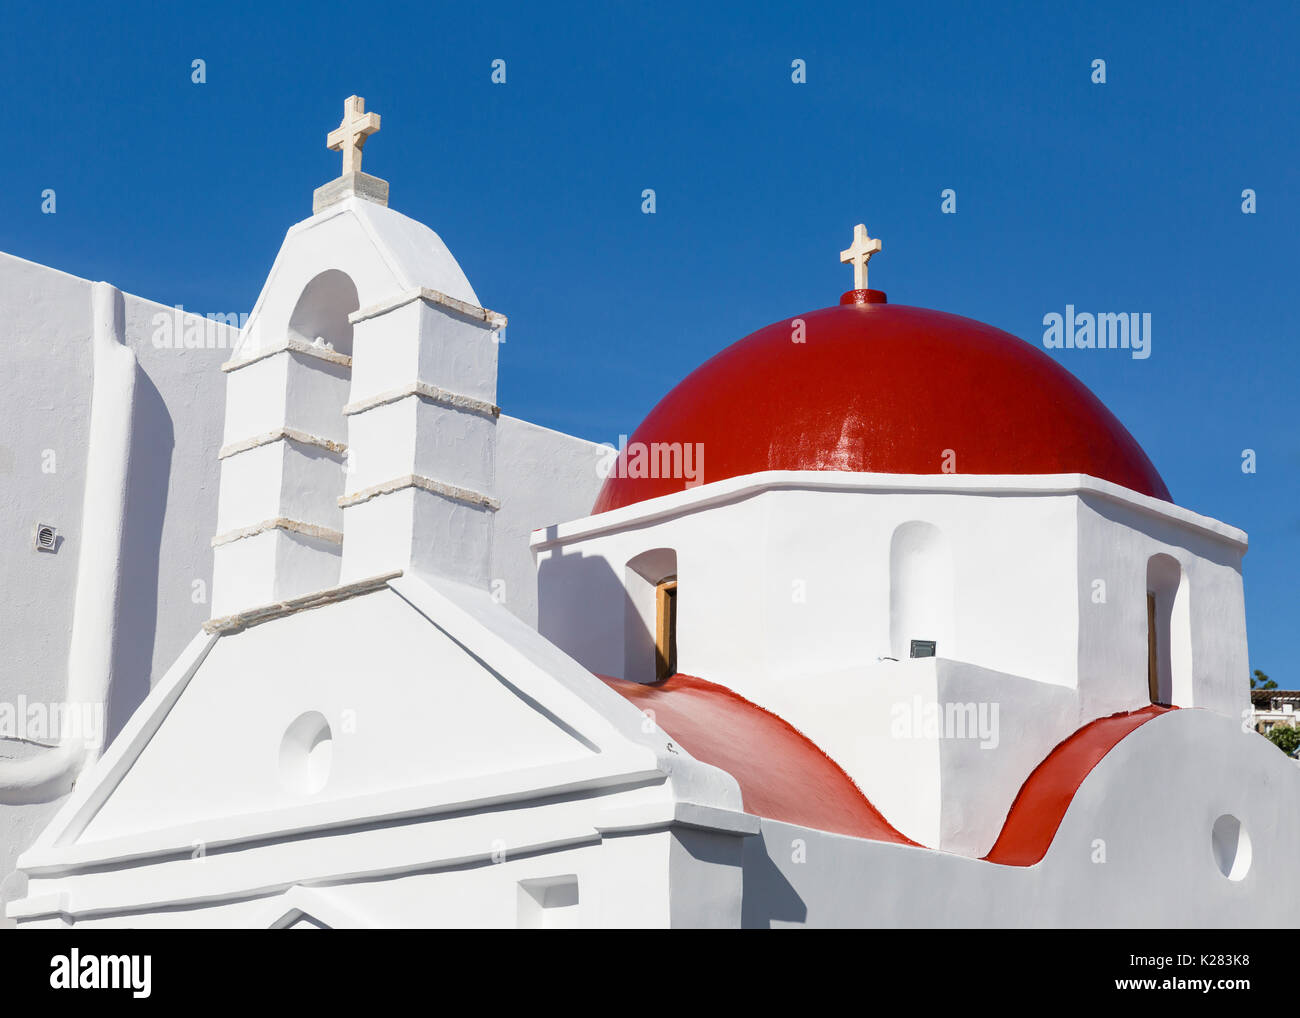 Dome and bell tower of a Greek Orthodox Church, Mykonos, Greece. Stock Photo